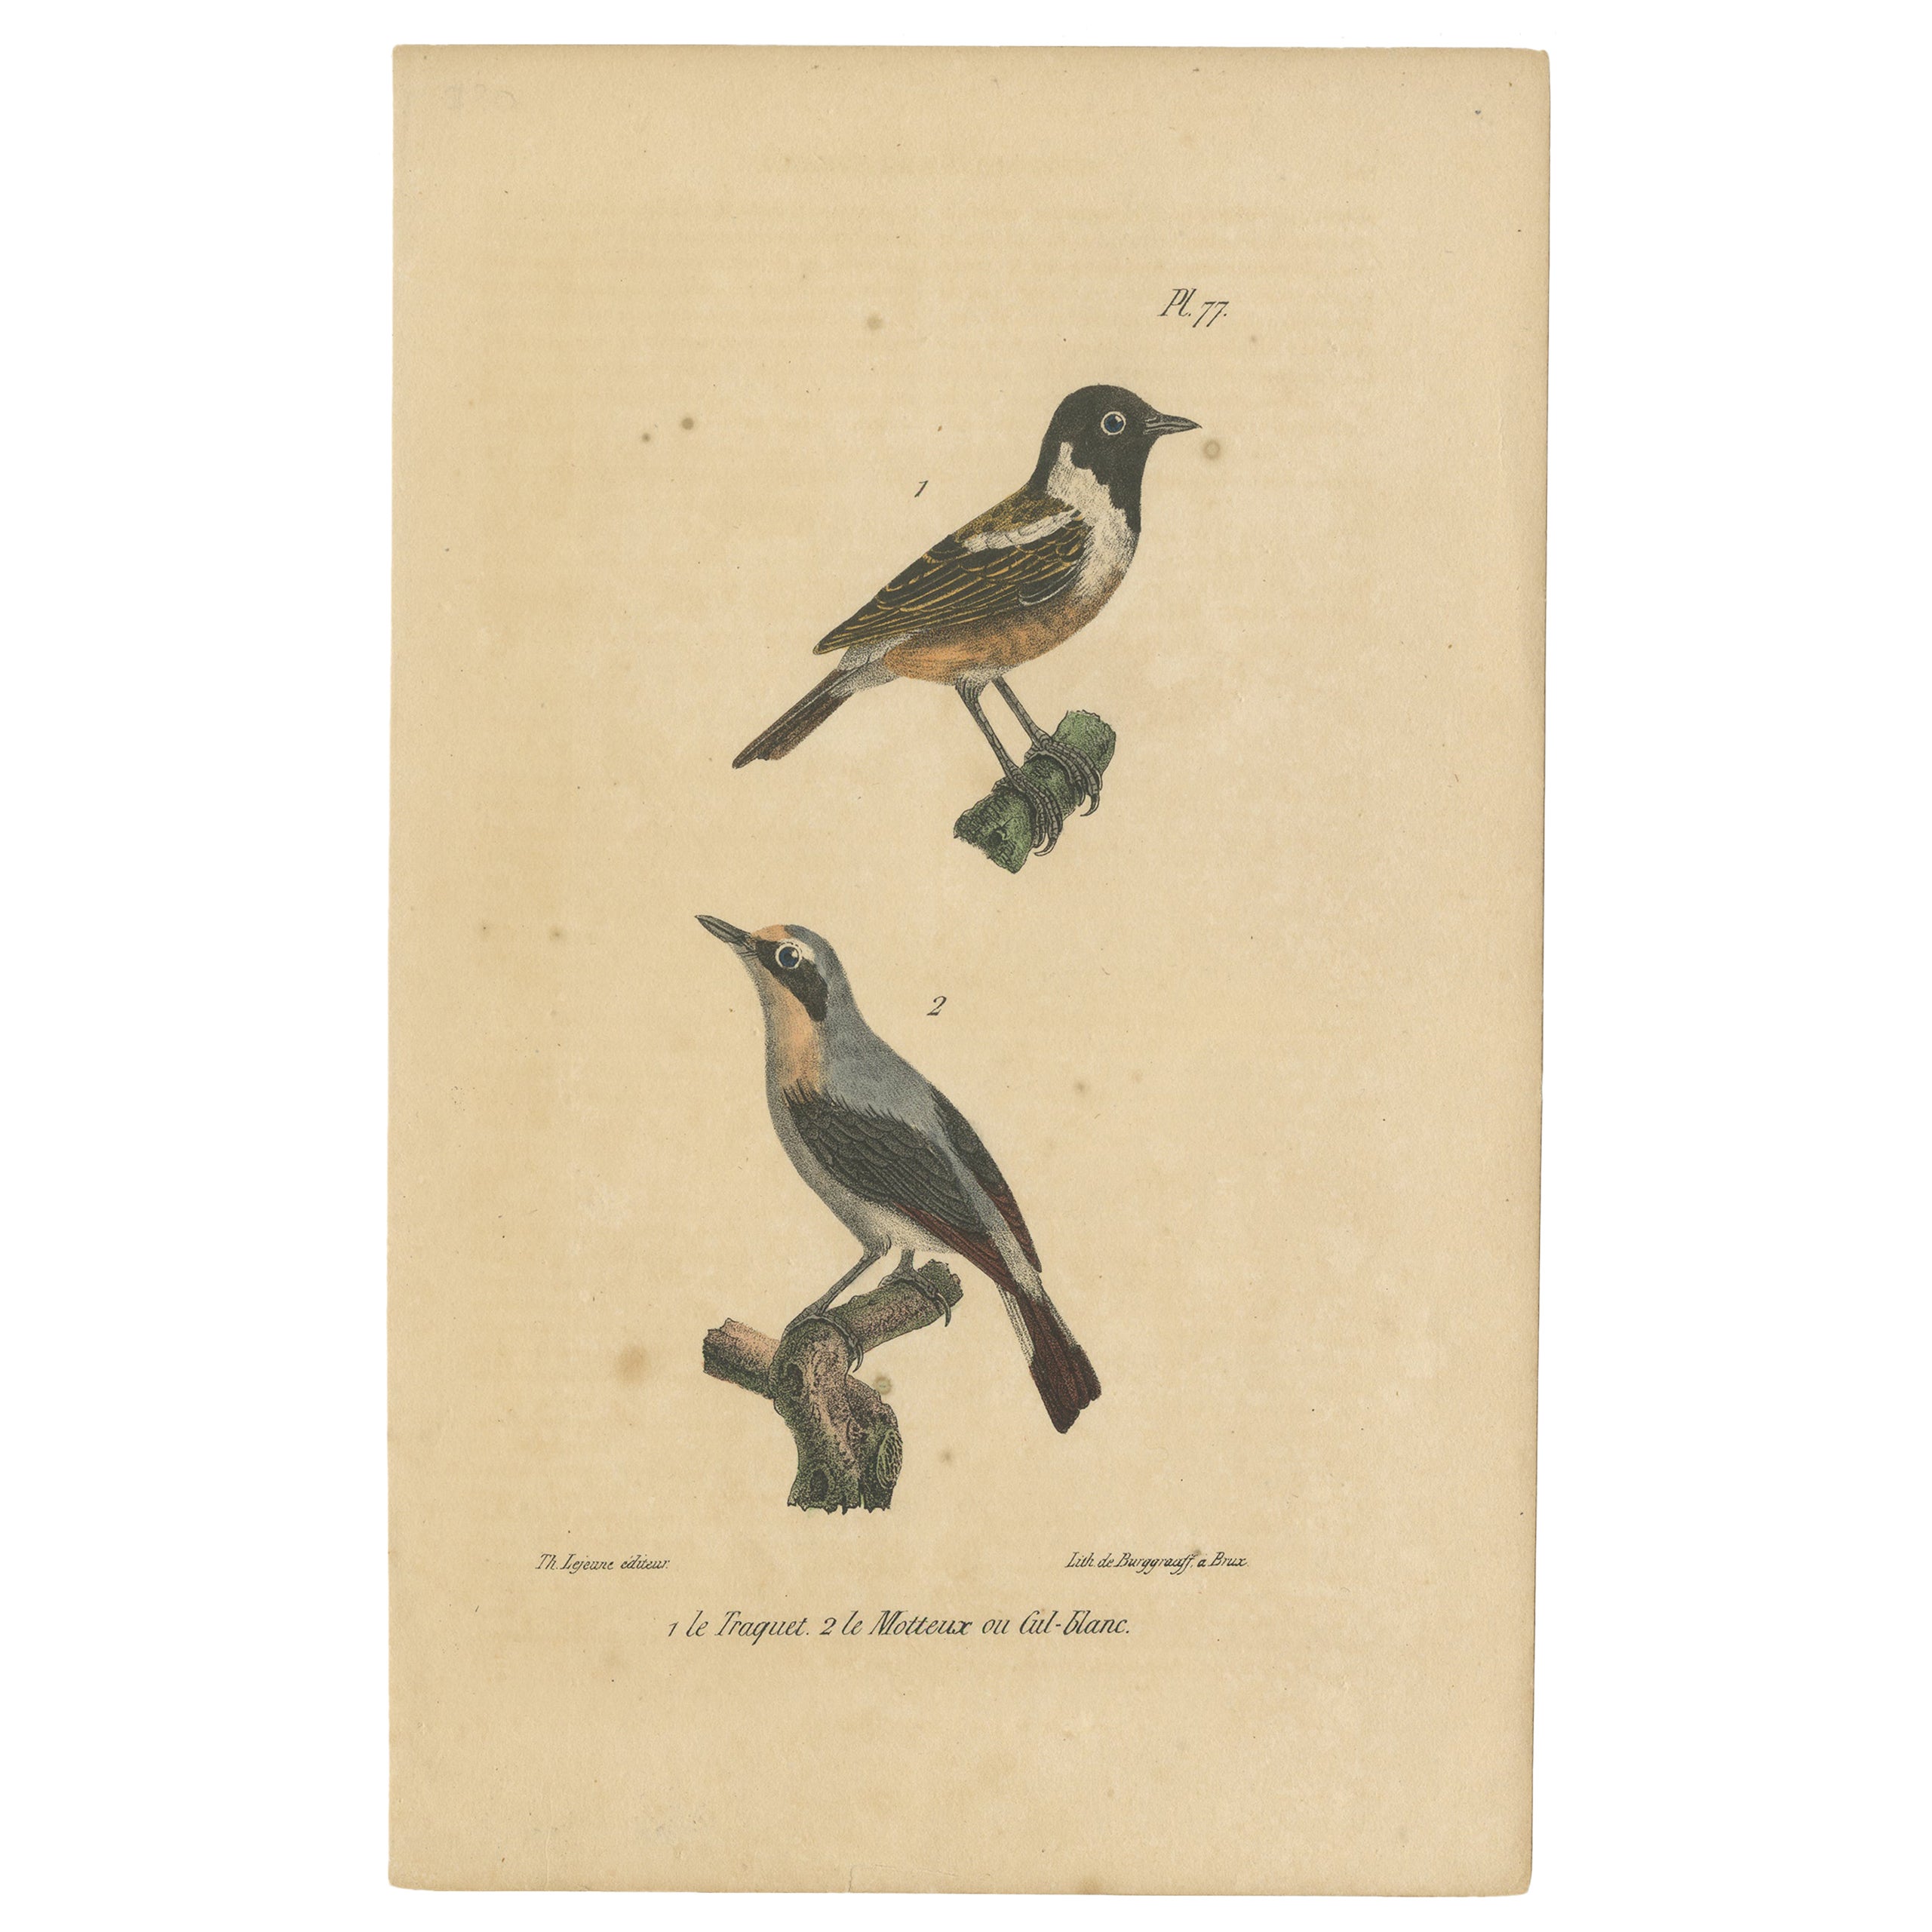 Pl. 77 Antique Bird Print of the Wheatear by Lejeune 'c.1830' For Sale